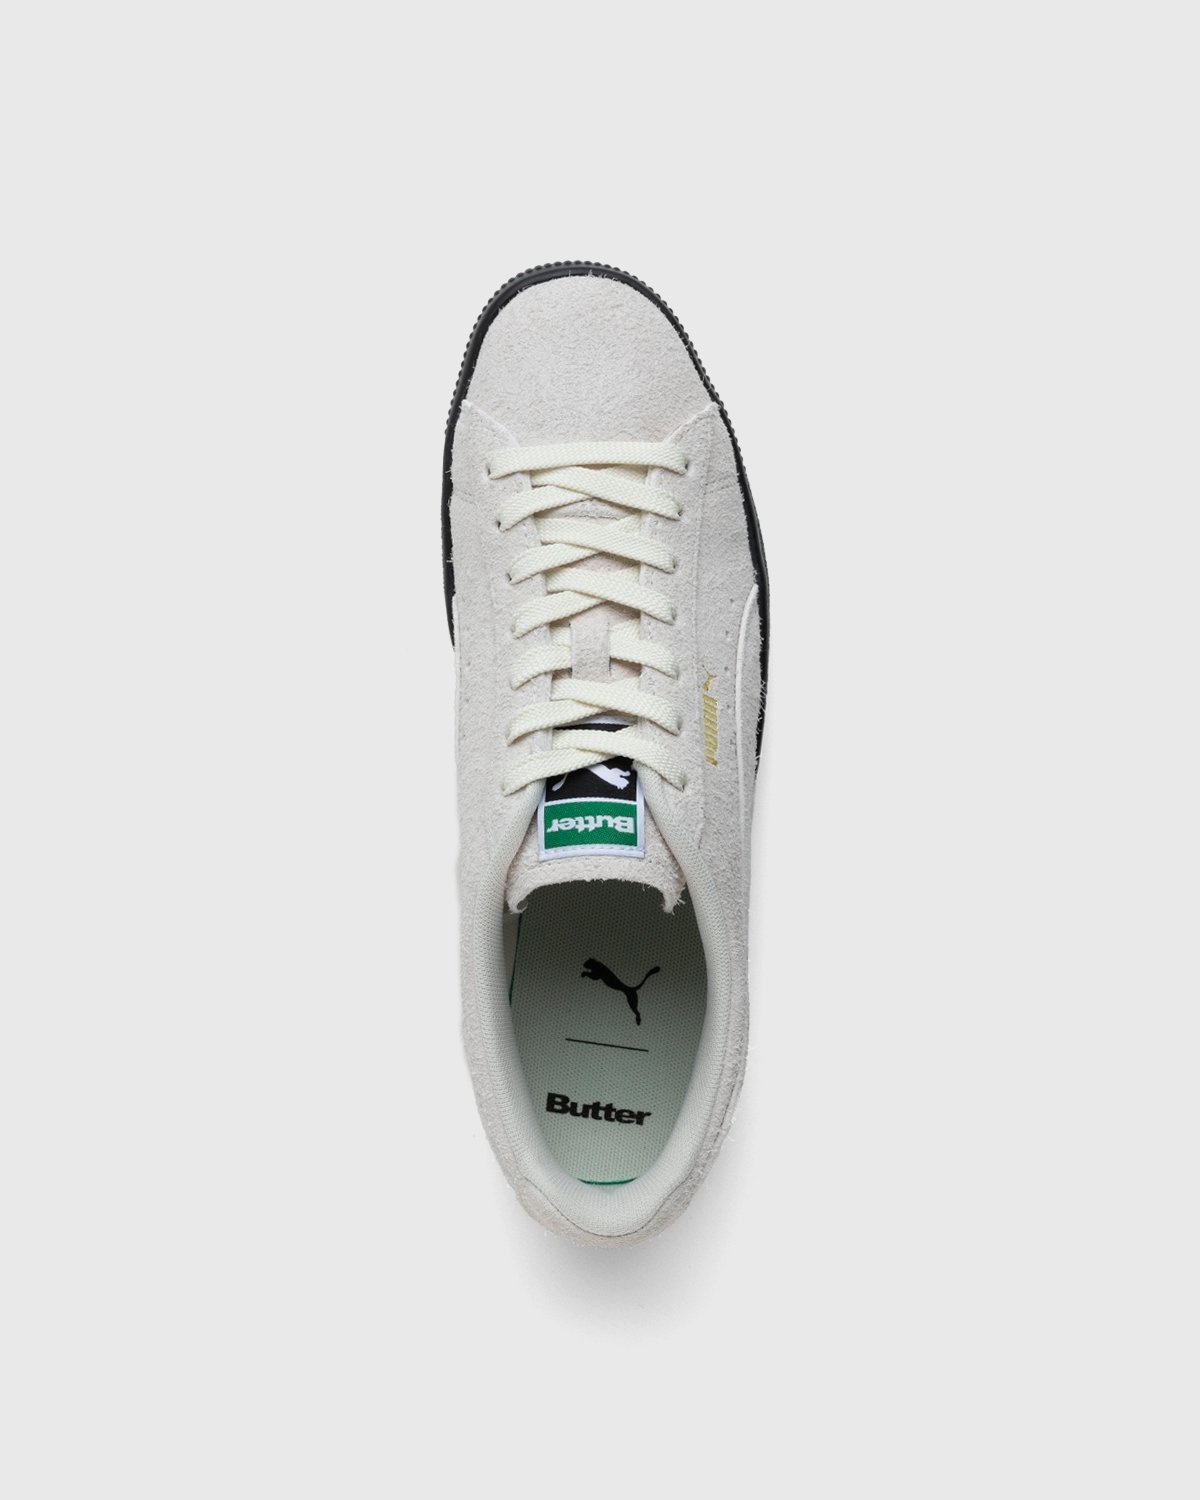 Puma x Butter Goods – Suede VTG Whisper White/Puma Black - Low Top Sneakers - Green - Image 6